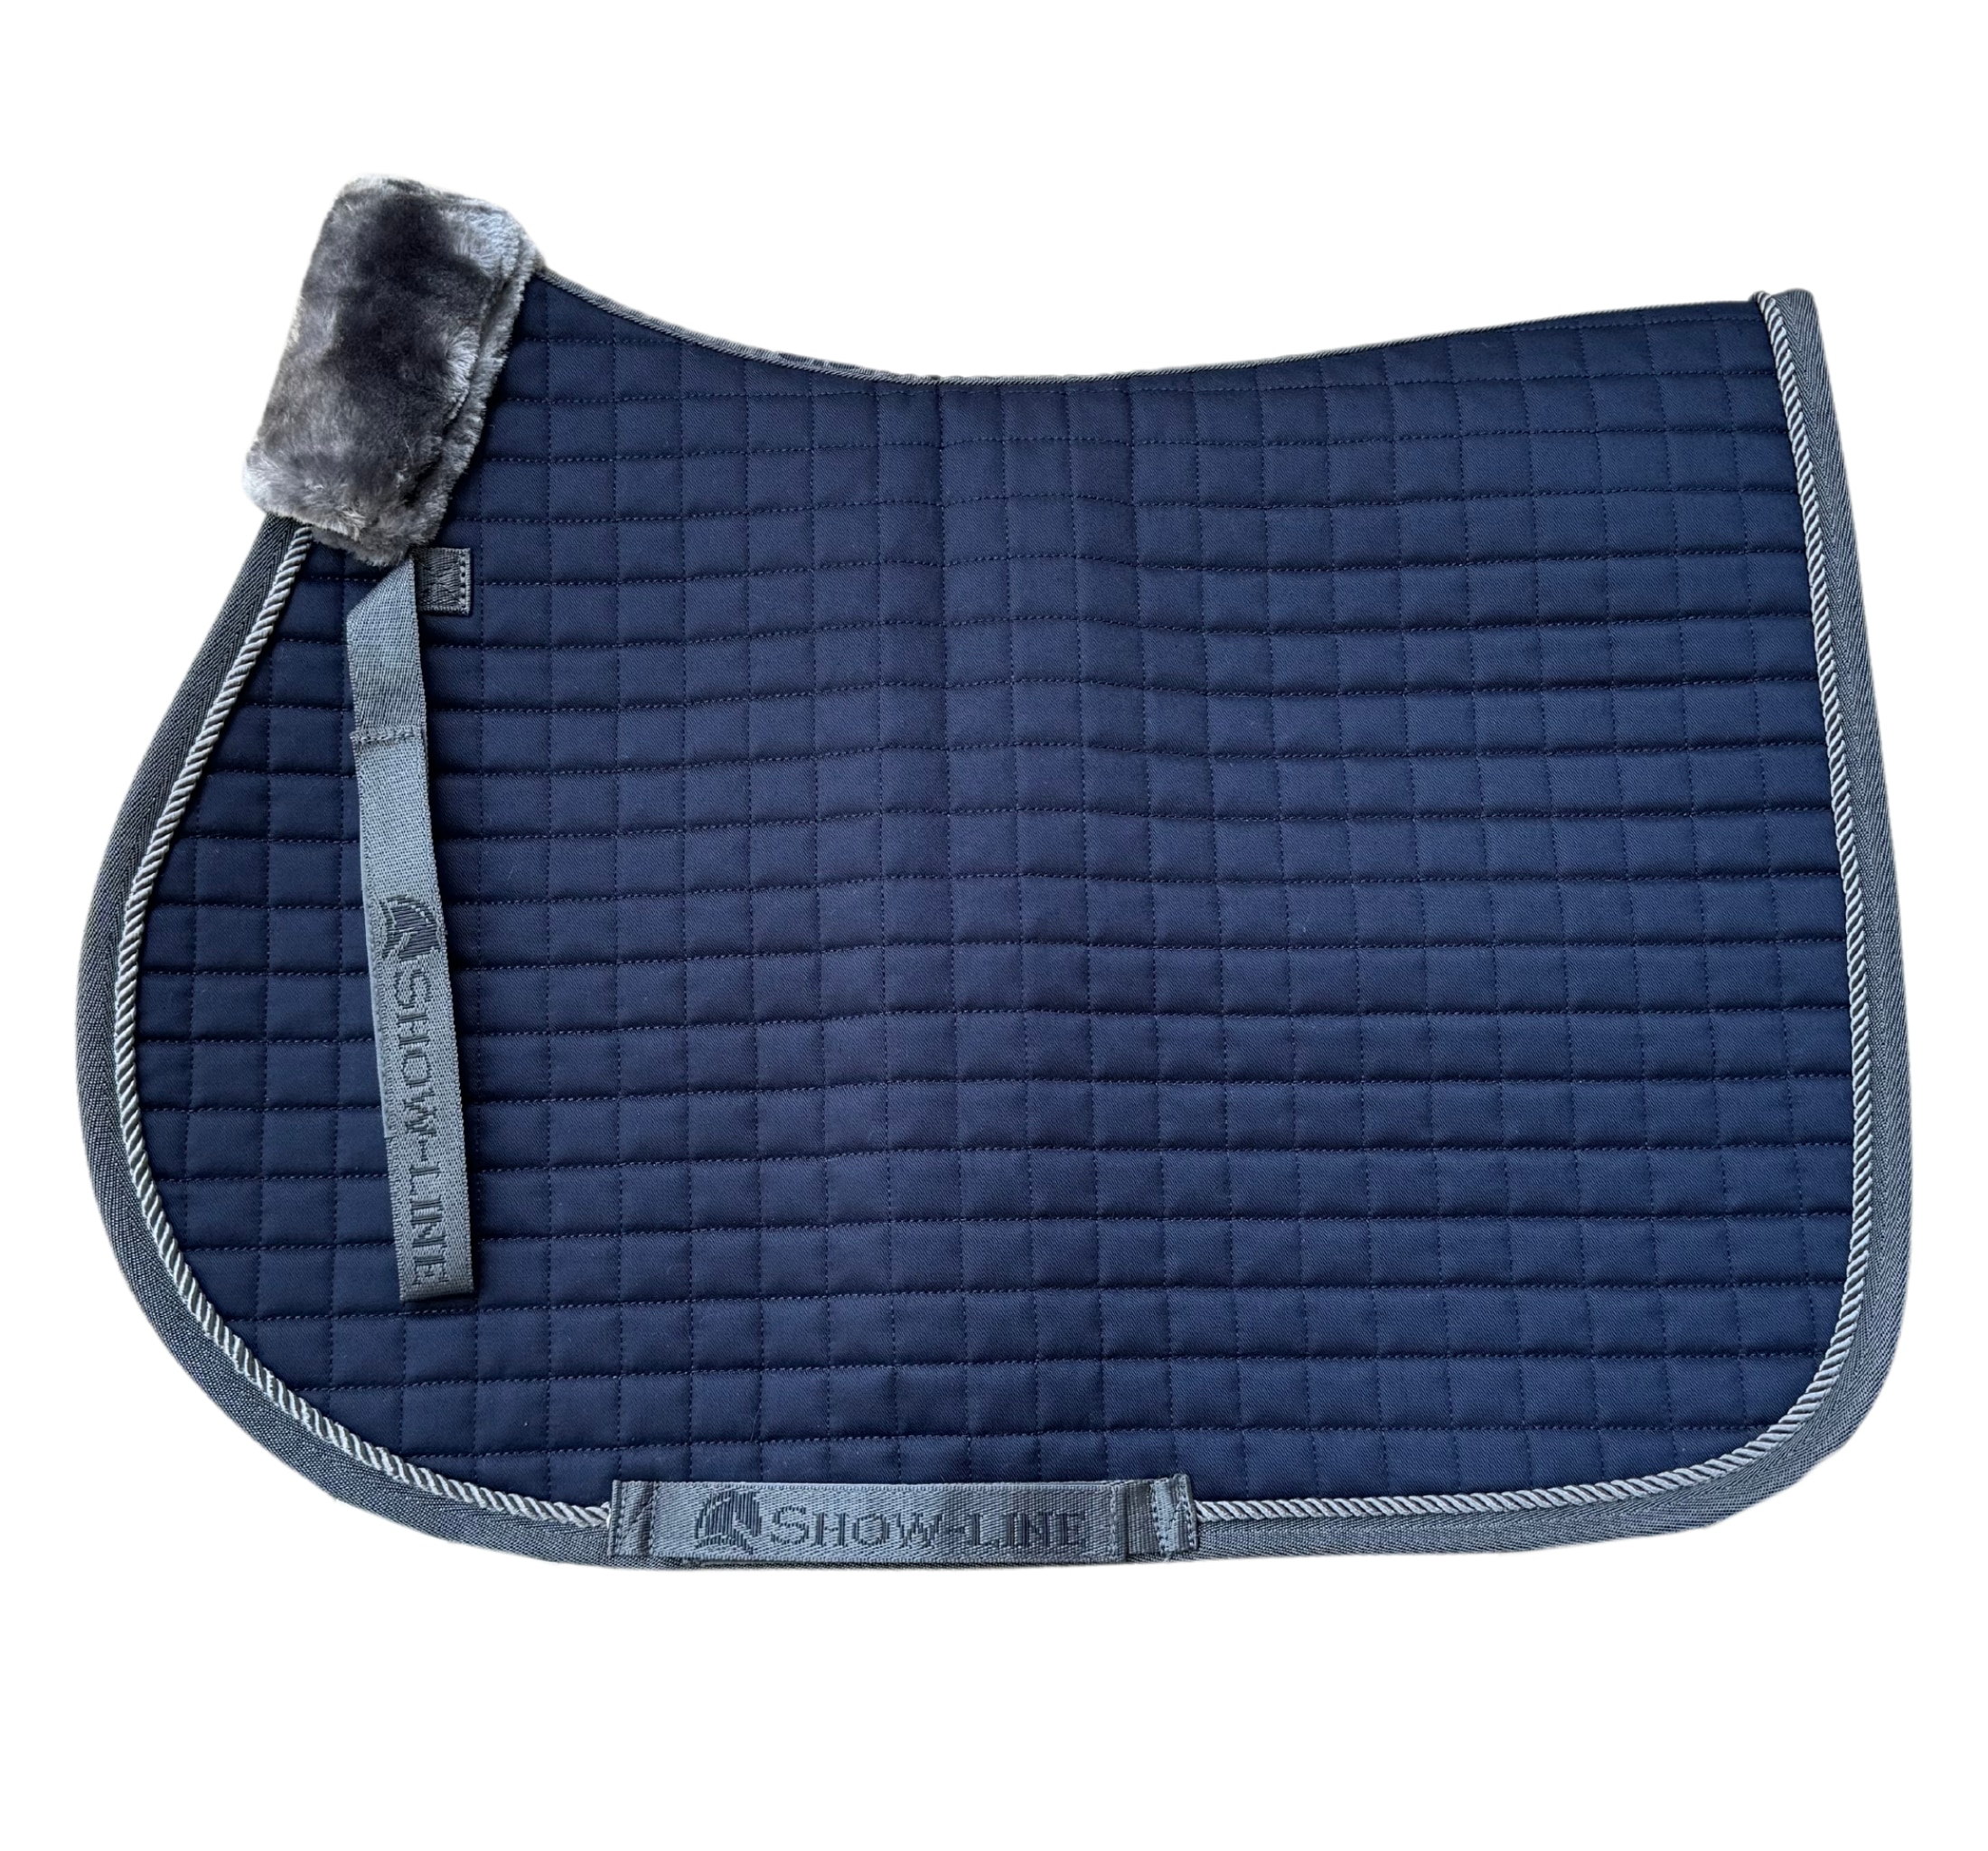 Show-Line Jumping Saddle Pad - Navy